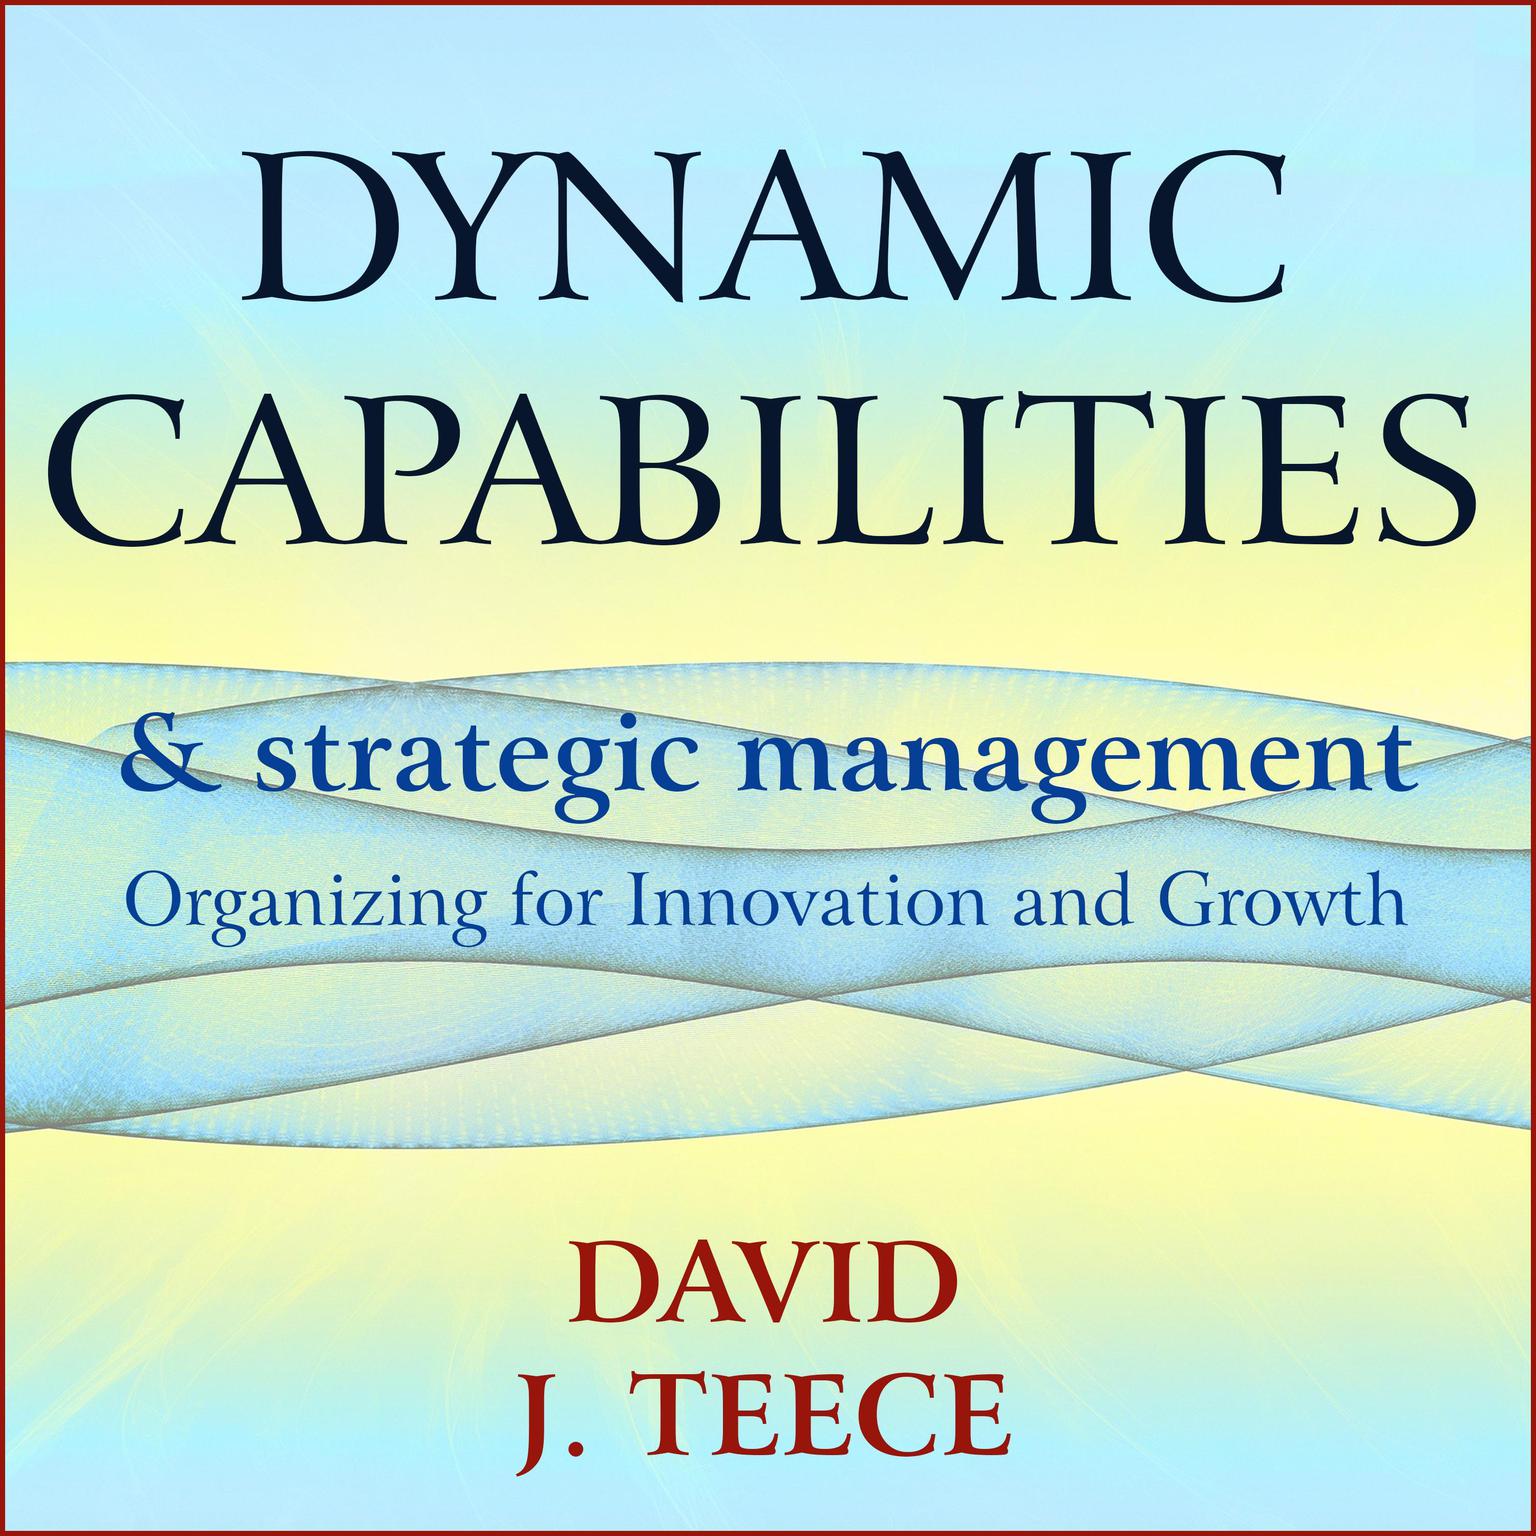 Dynamic Capabilities and Strategic Management: Organizing for Innovation and Growth Audiobook, by David J. Teece